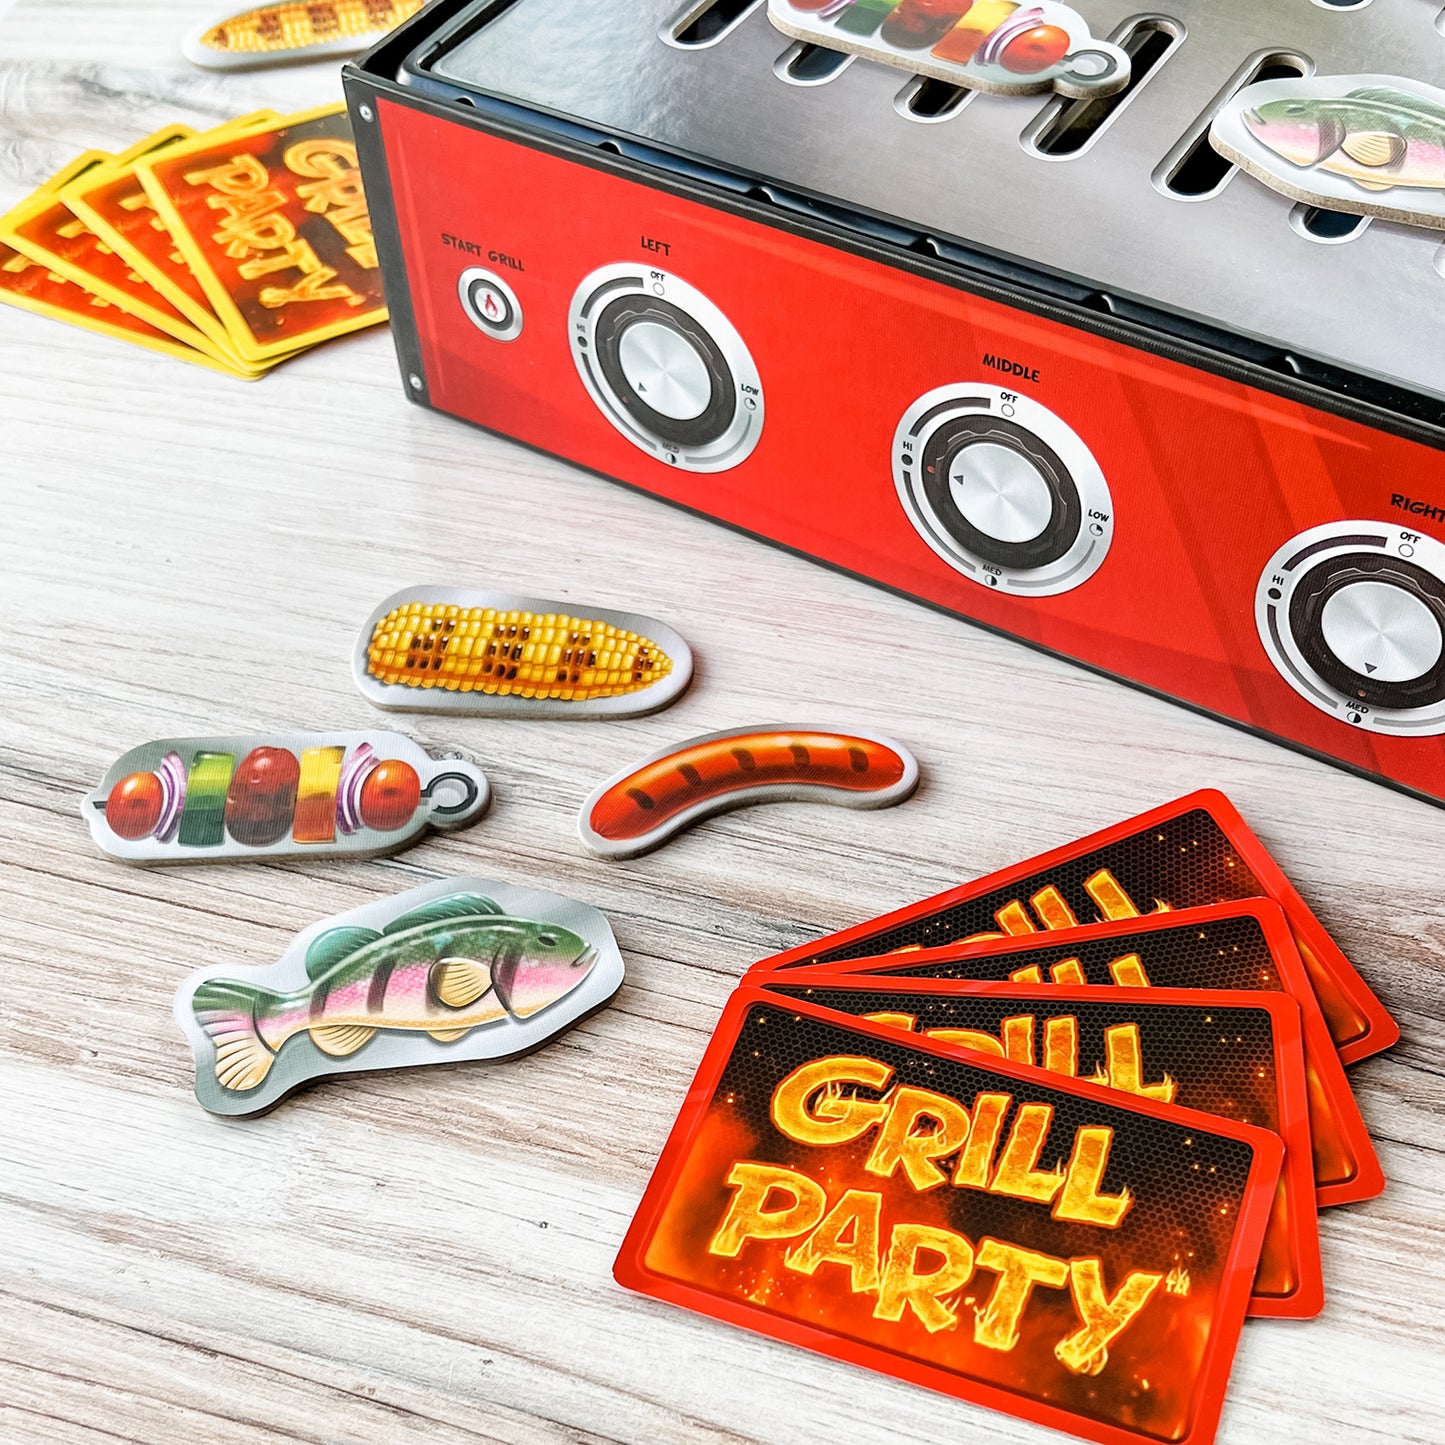 Grill Party by SimplyFun is a fun math and STEM game that helps teach algebra concepts for ages 8 and up